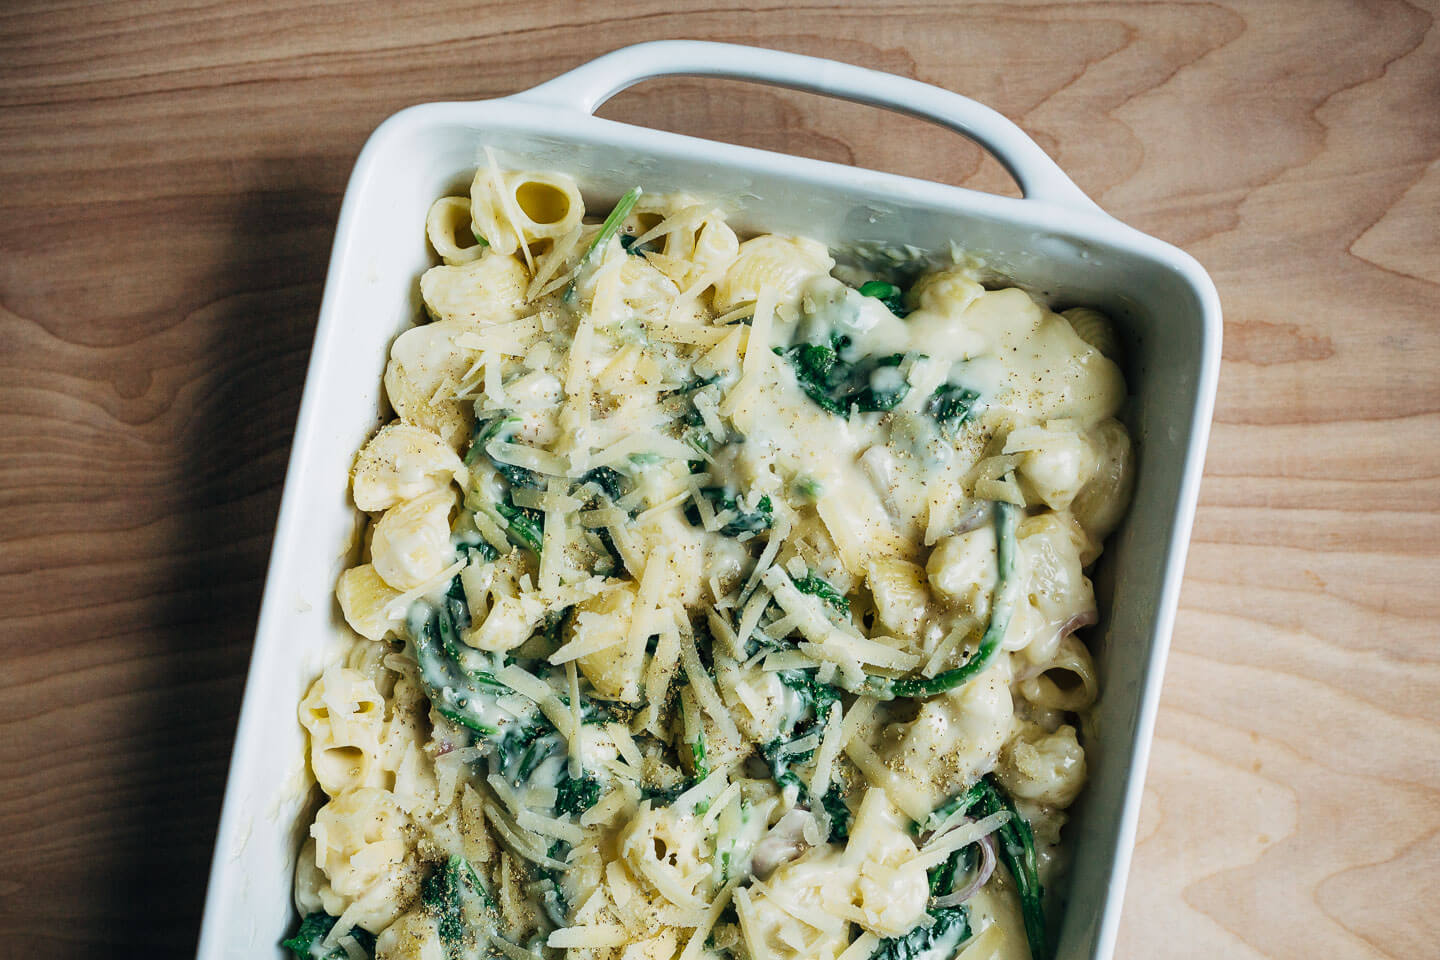 A recipe for mac and cheese with greens that makes delicious use of flavorful, but often forgotten, radish and turnip greens.